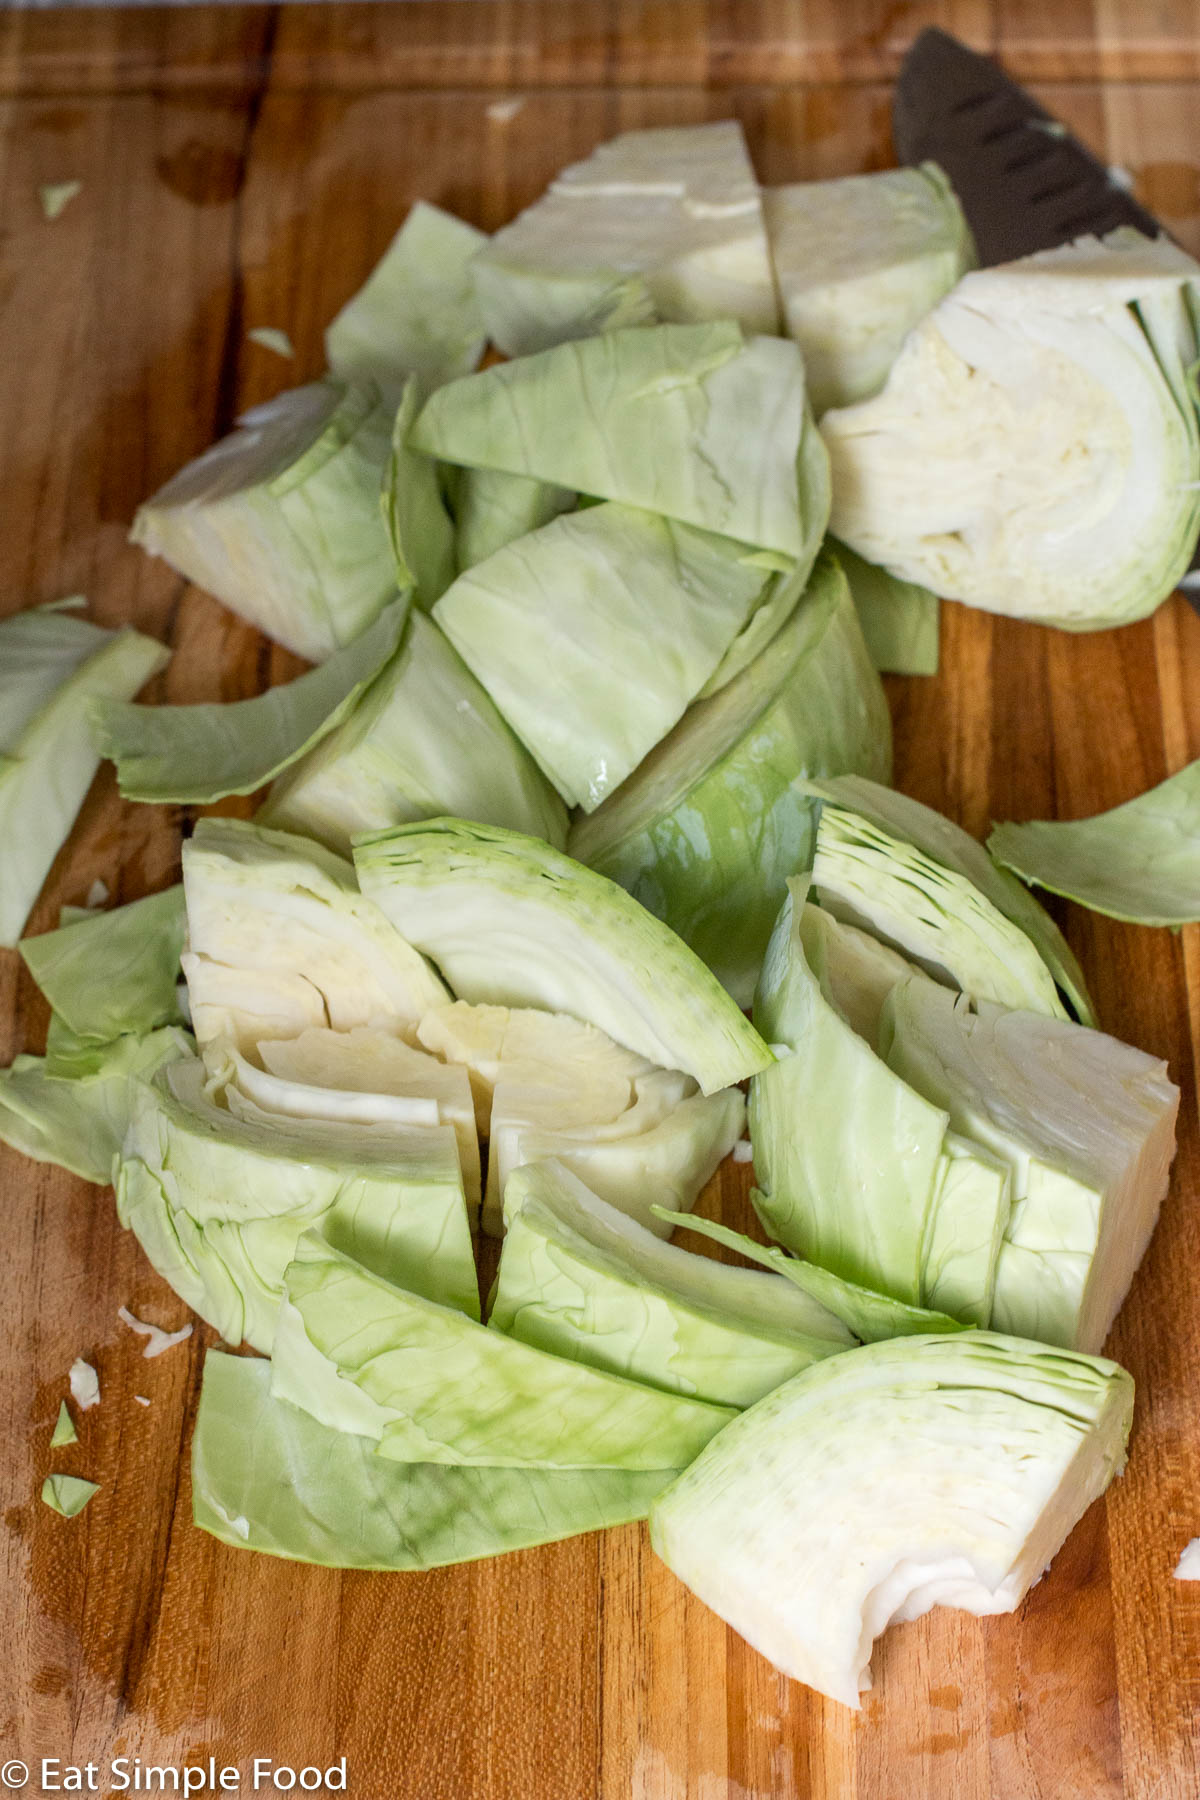 Chunks of raw cut up cabbage on a wood cutting board with a chefs knife in the background.